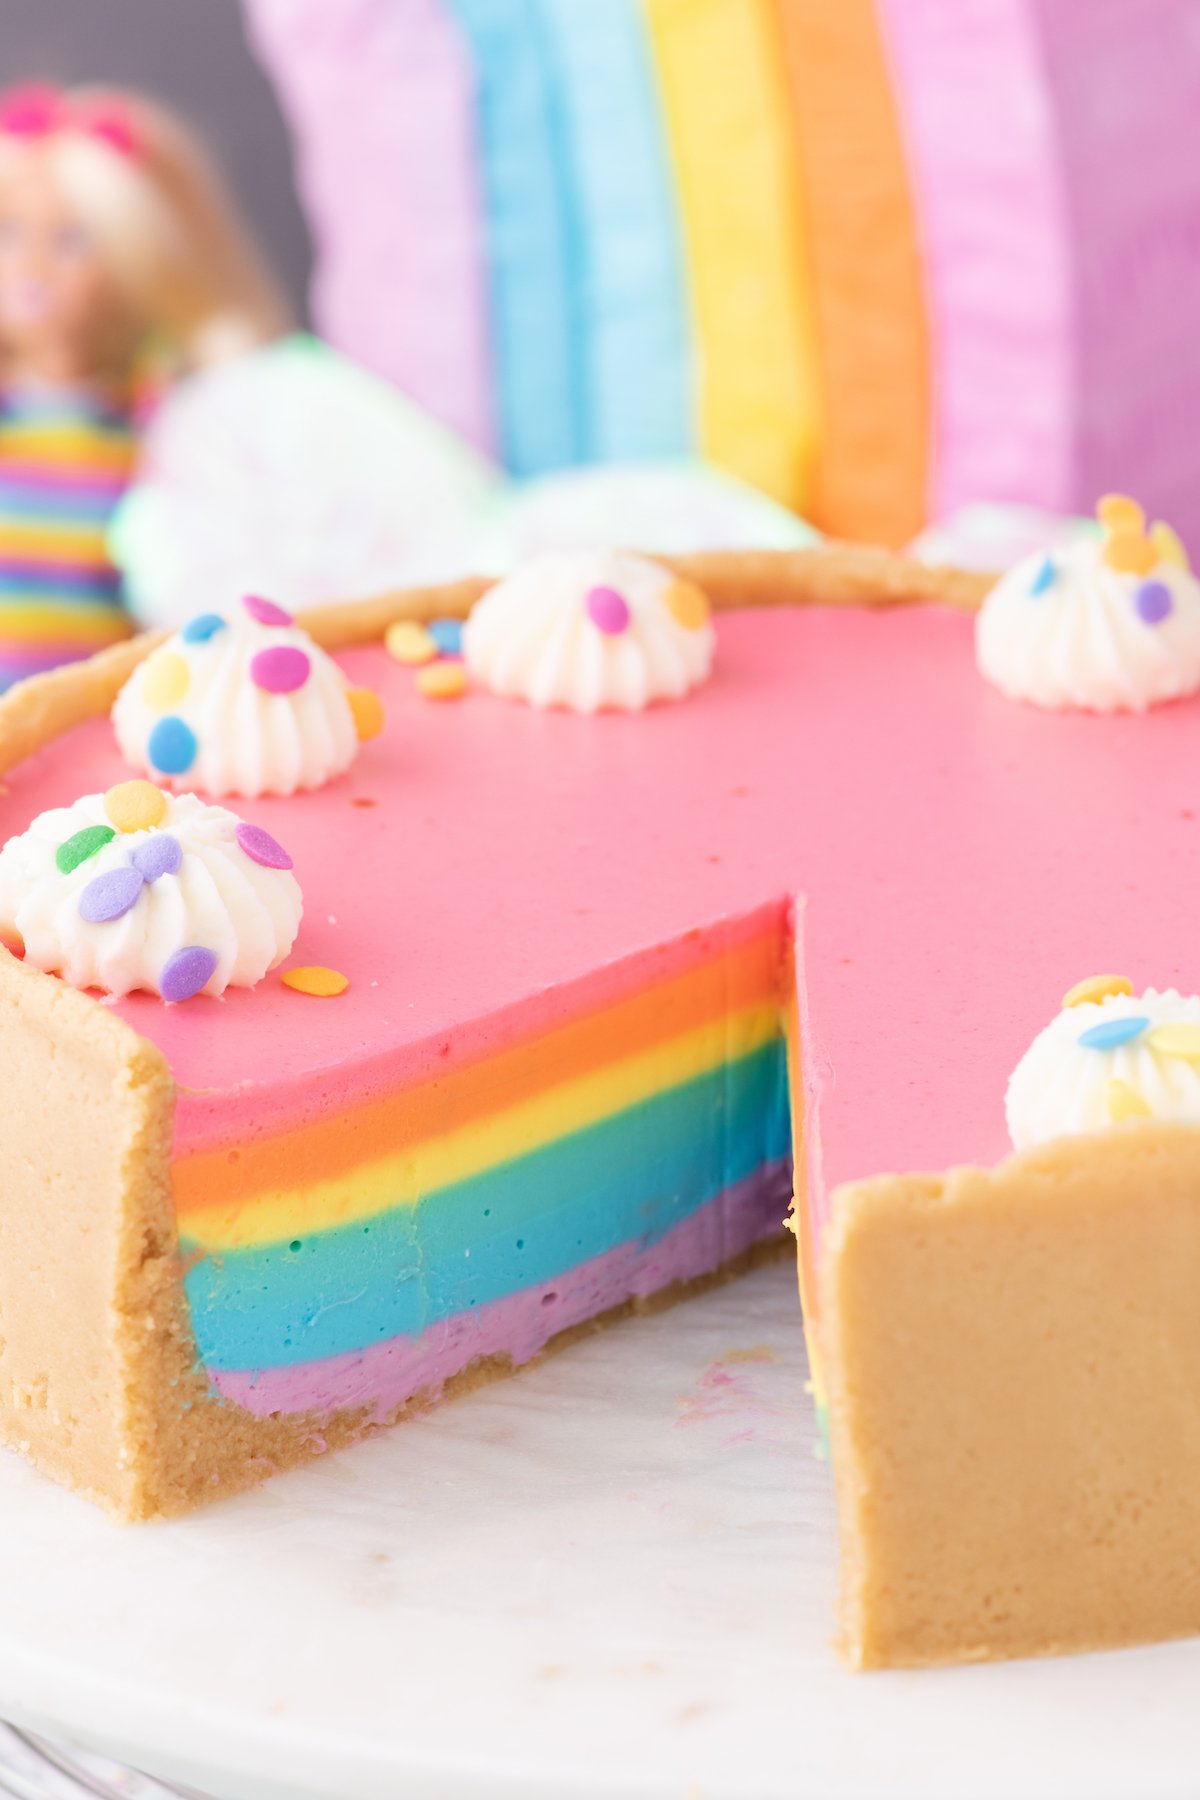 A no-bake cheesecake fit for a Barbie party - with all the colors of the rainbow.